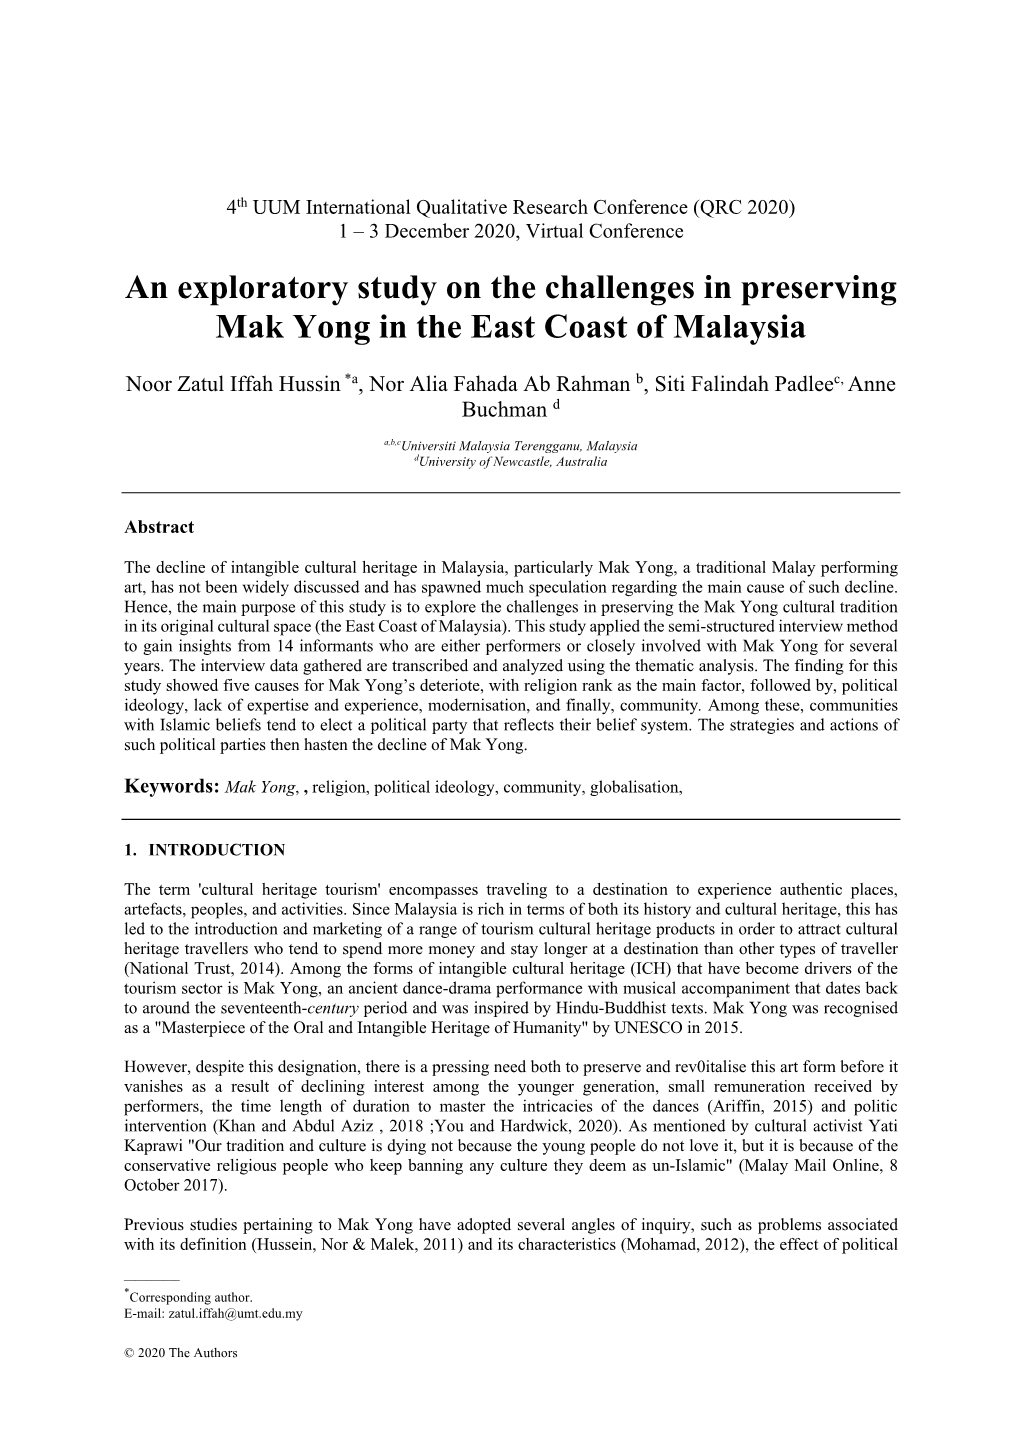 An Exploratory Study on the Challenges in Preserving Mak Yong in the East Coast of Malaysia